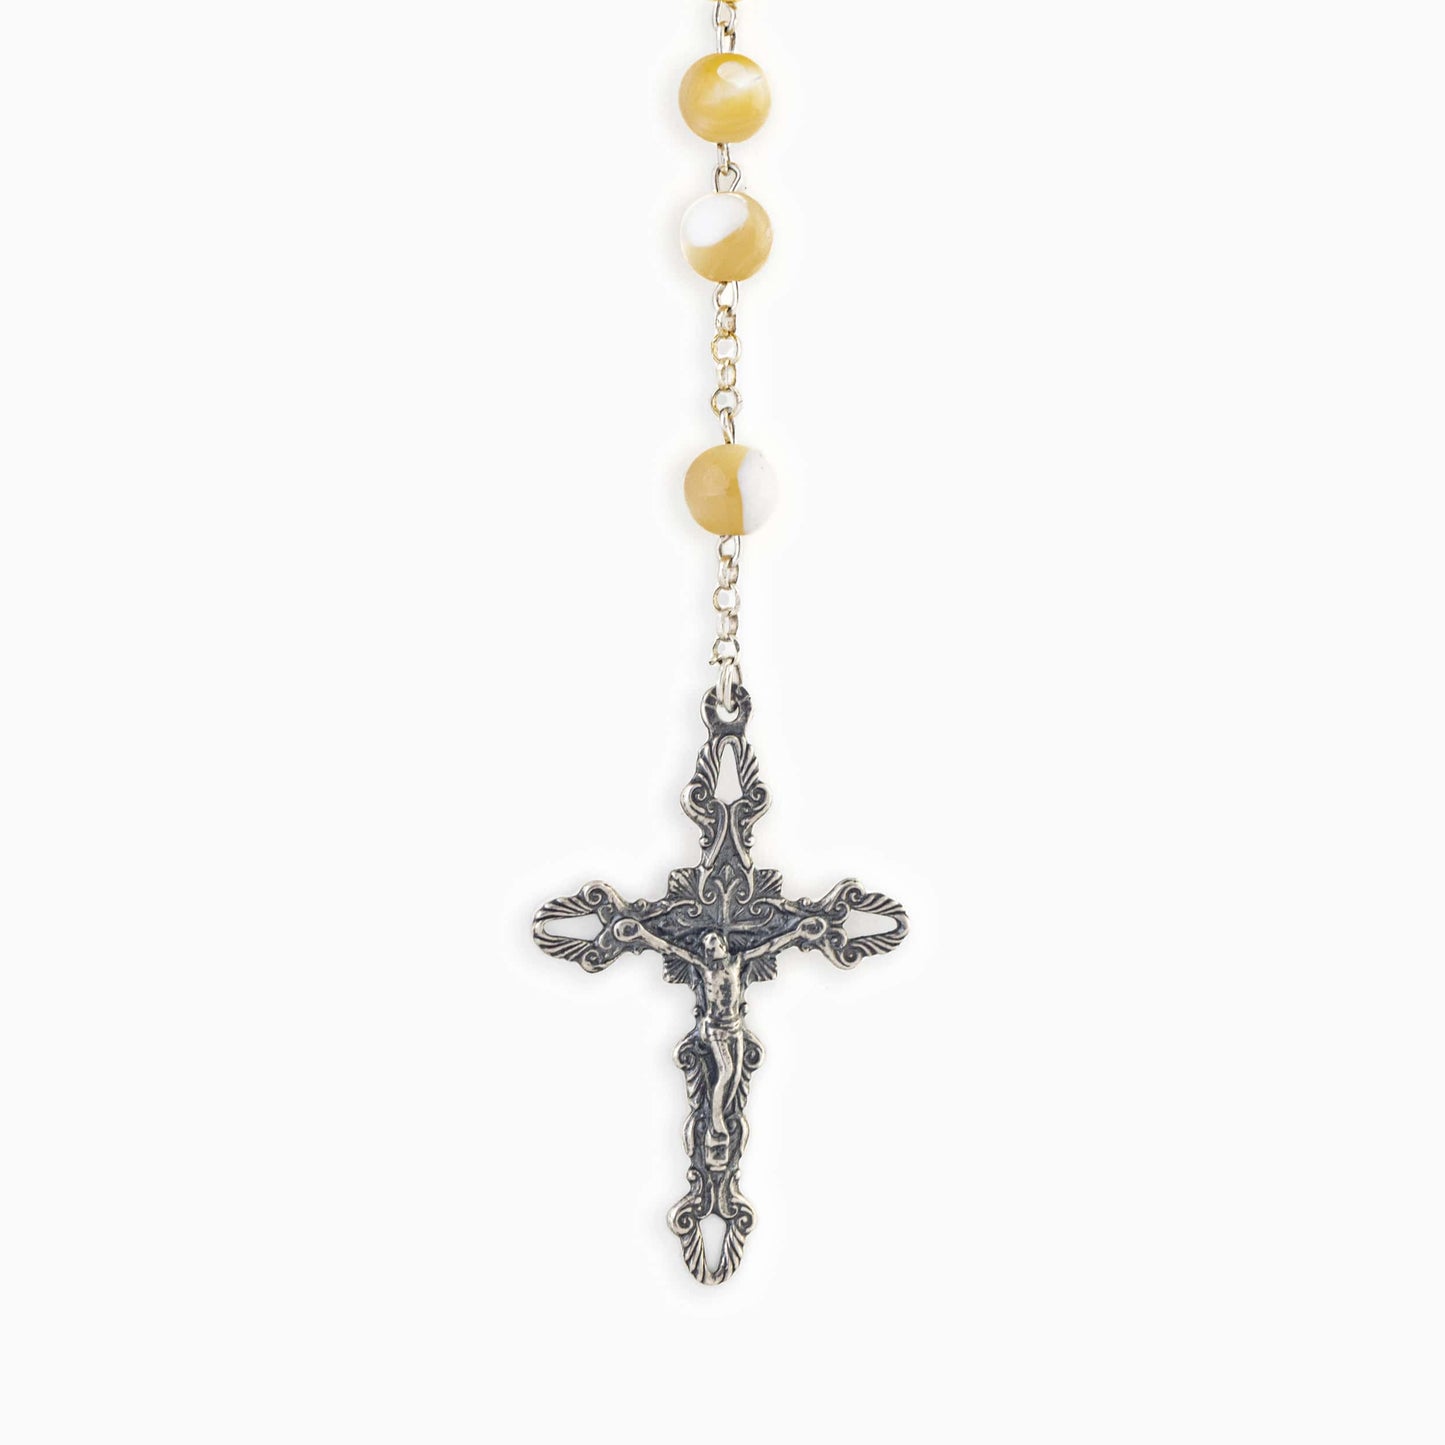 MONDO CATTOLICO Prayer Beads Mother of Pearl Sterling Silver Rosary